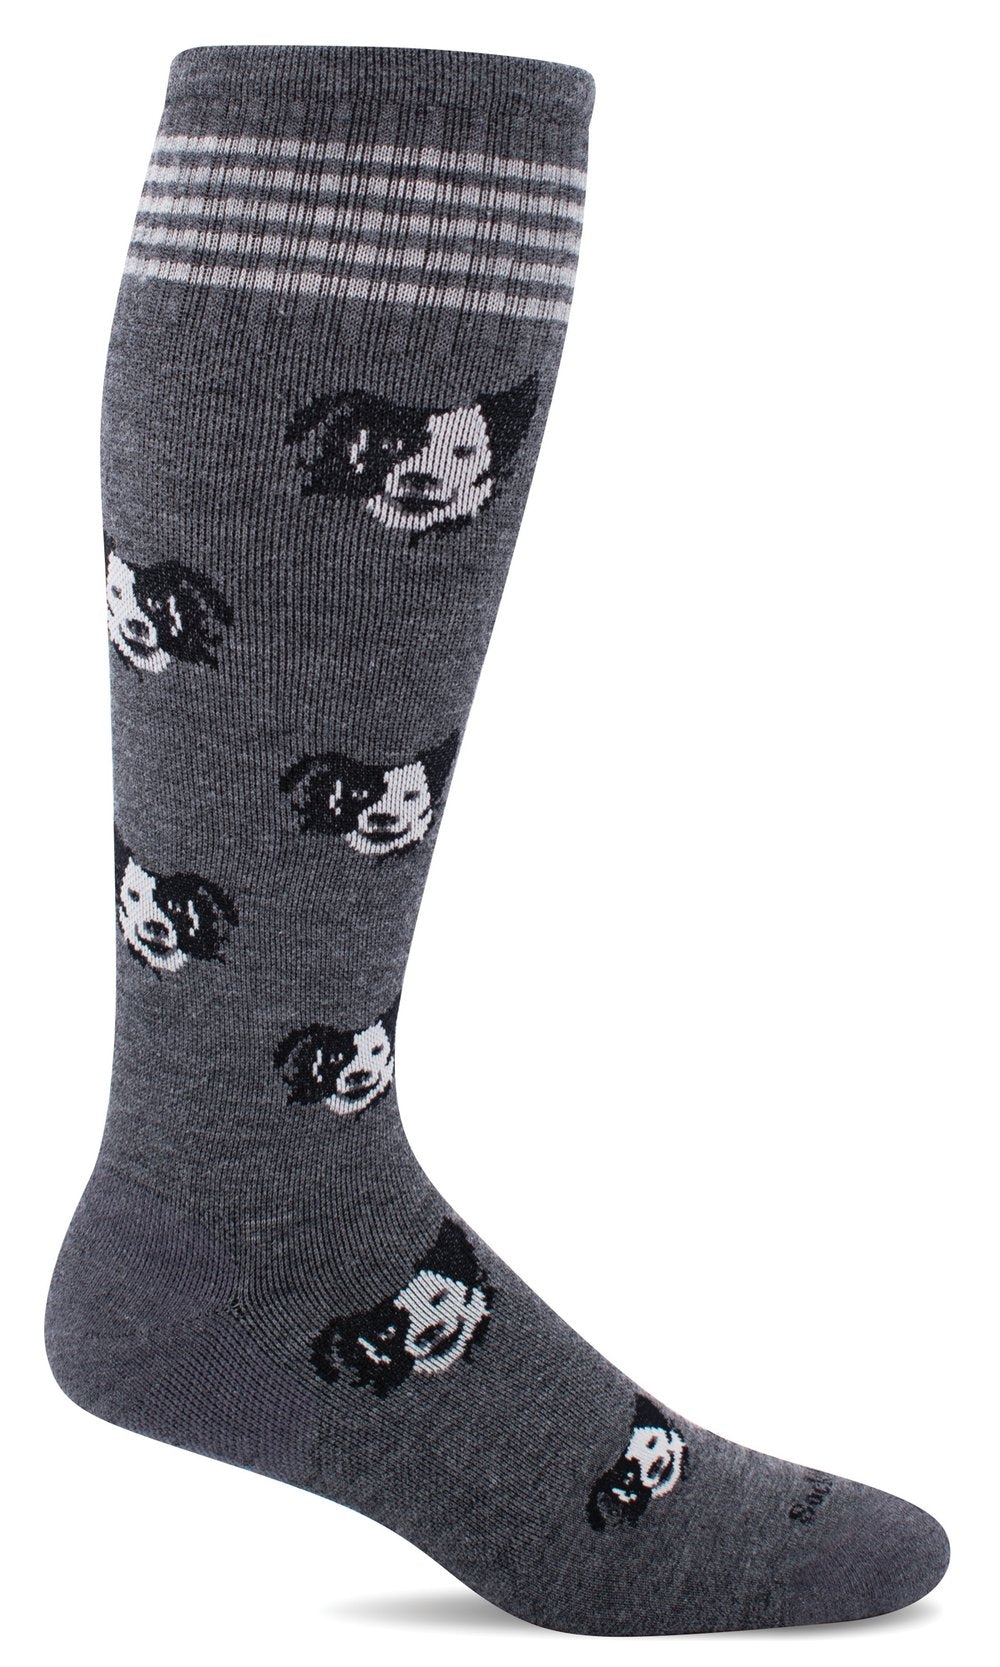 Canine Cuddle Knee-High - Charcoal Moderate Compression (15-20mmHg)